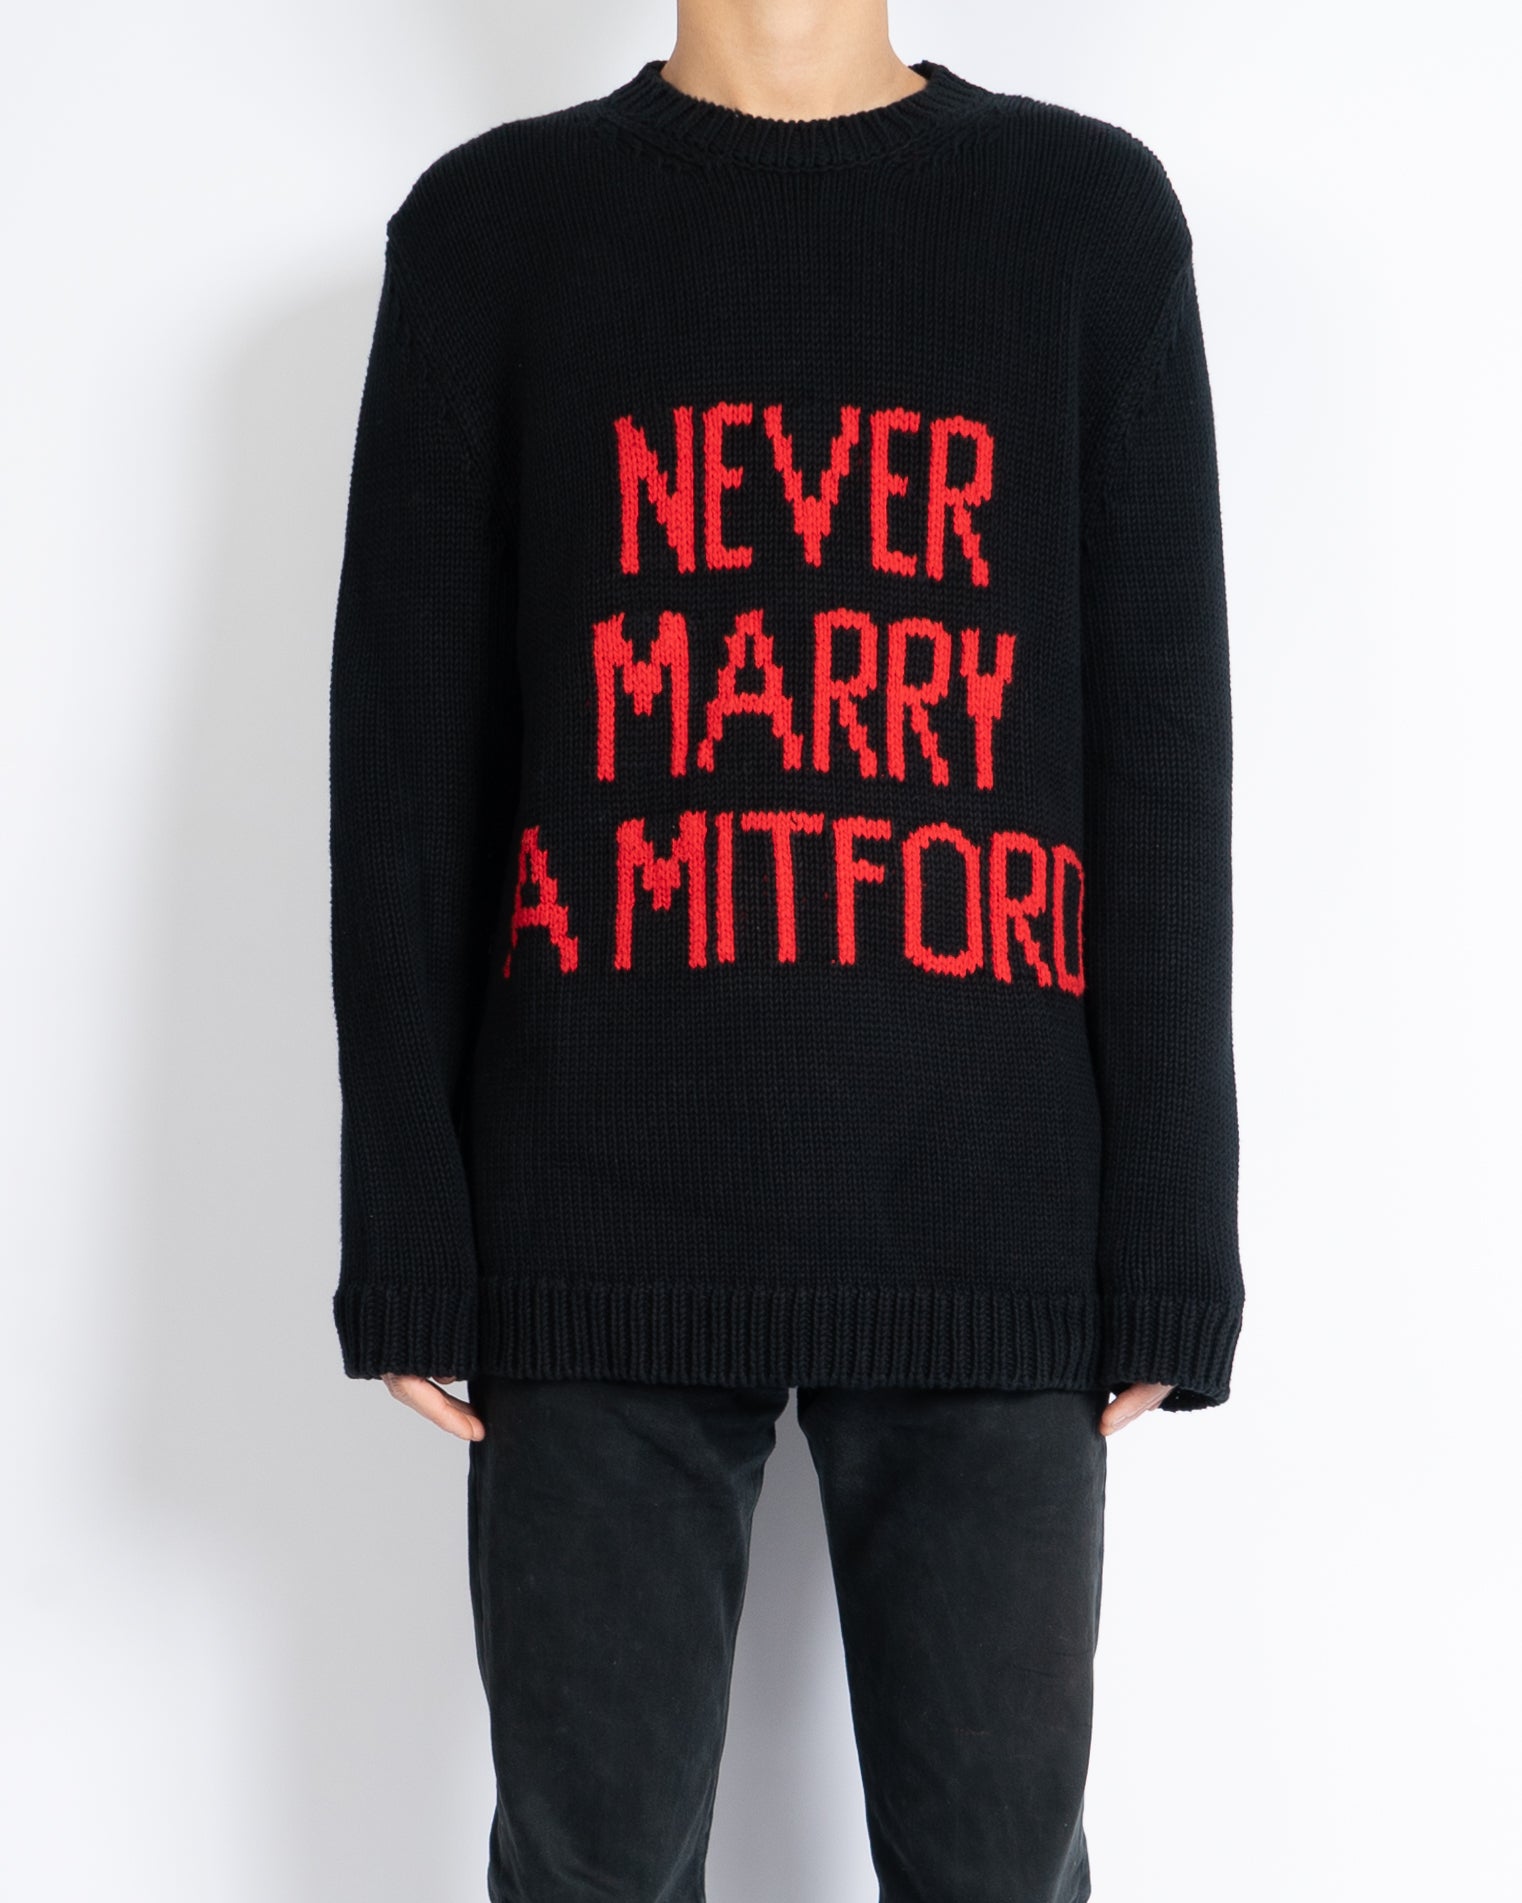 Never Marry a Miftord Knit